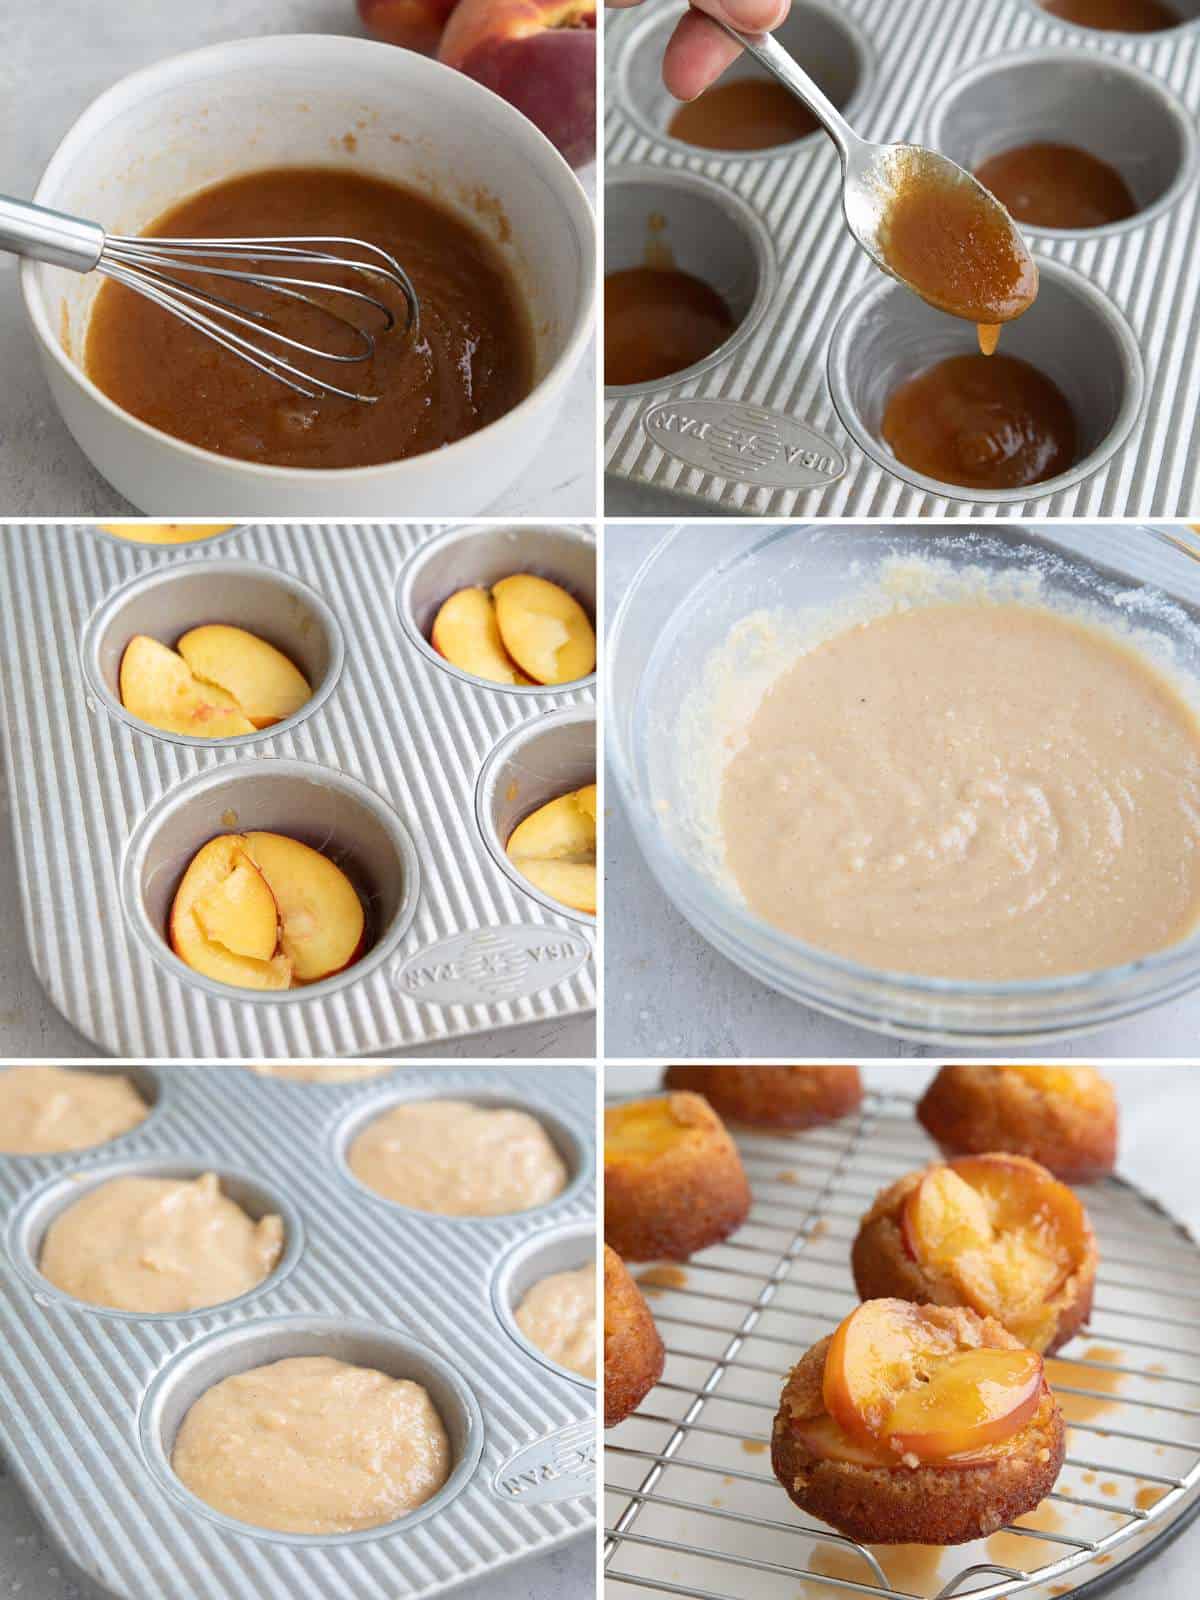 A collage of 6 images showing the steps for making Keto Peach Upside Down Cakes.